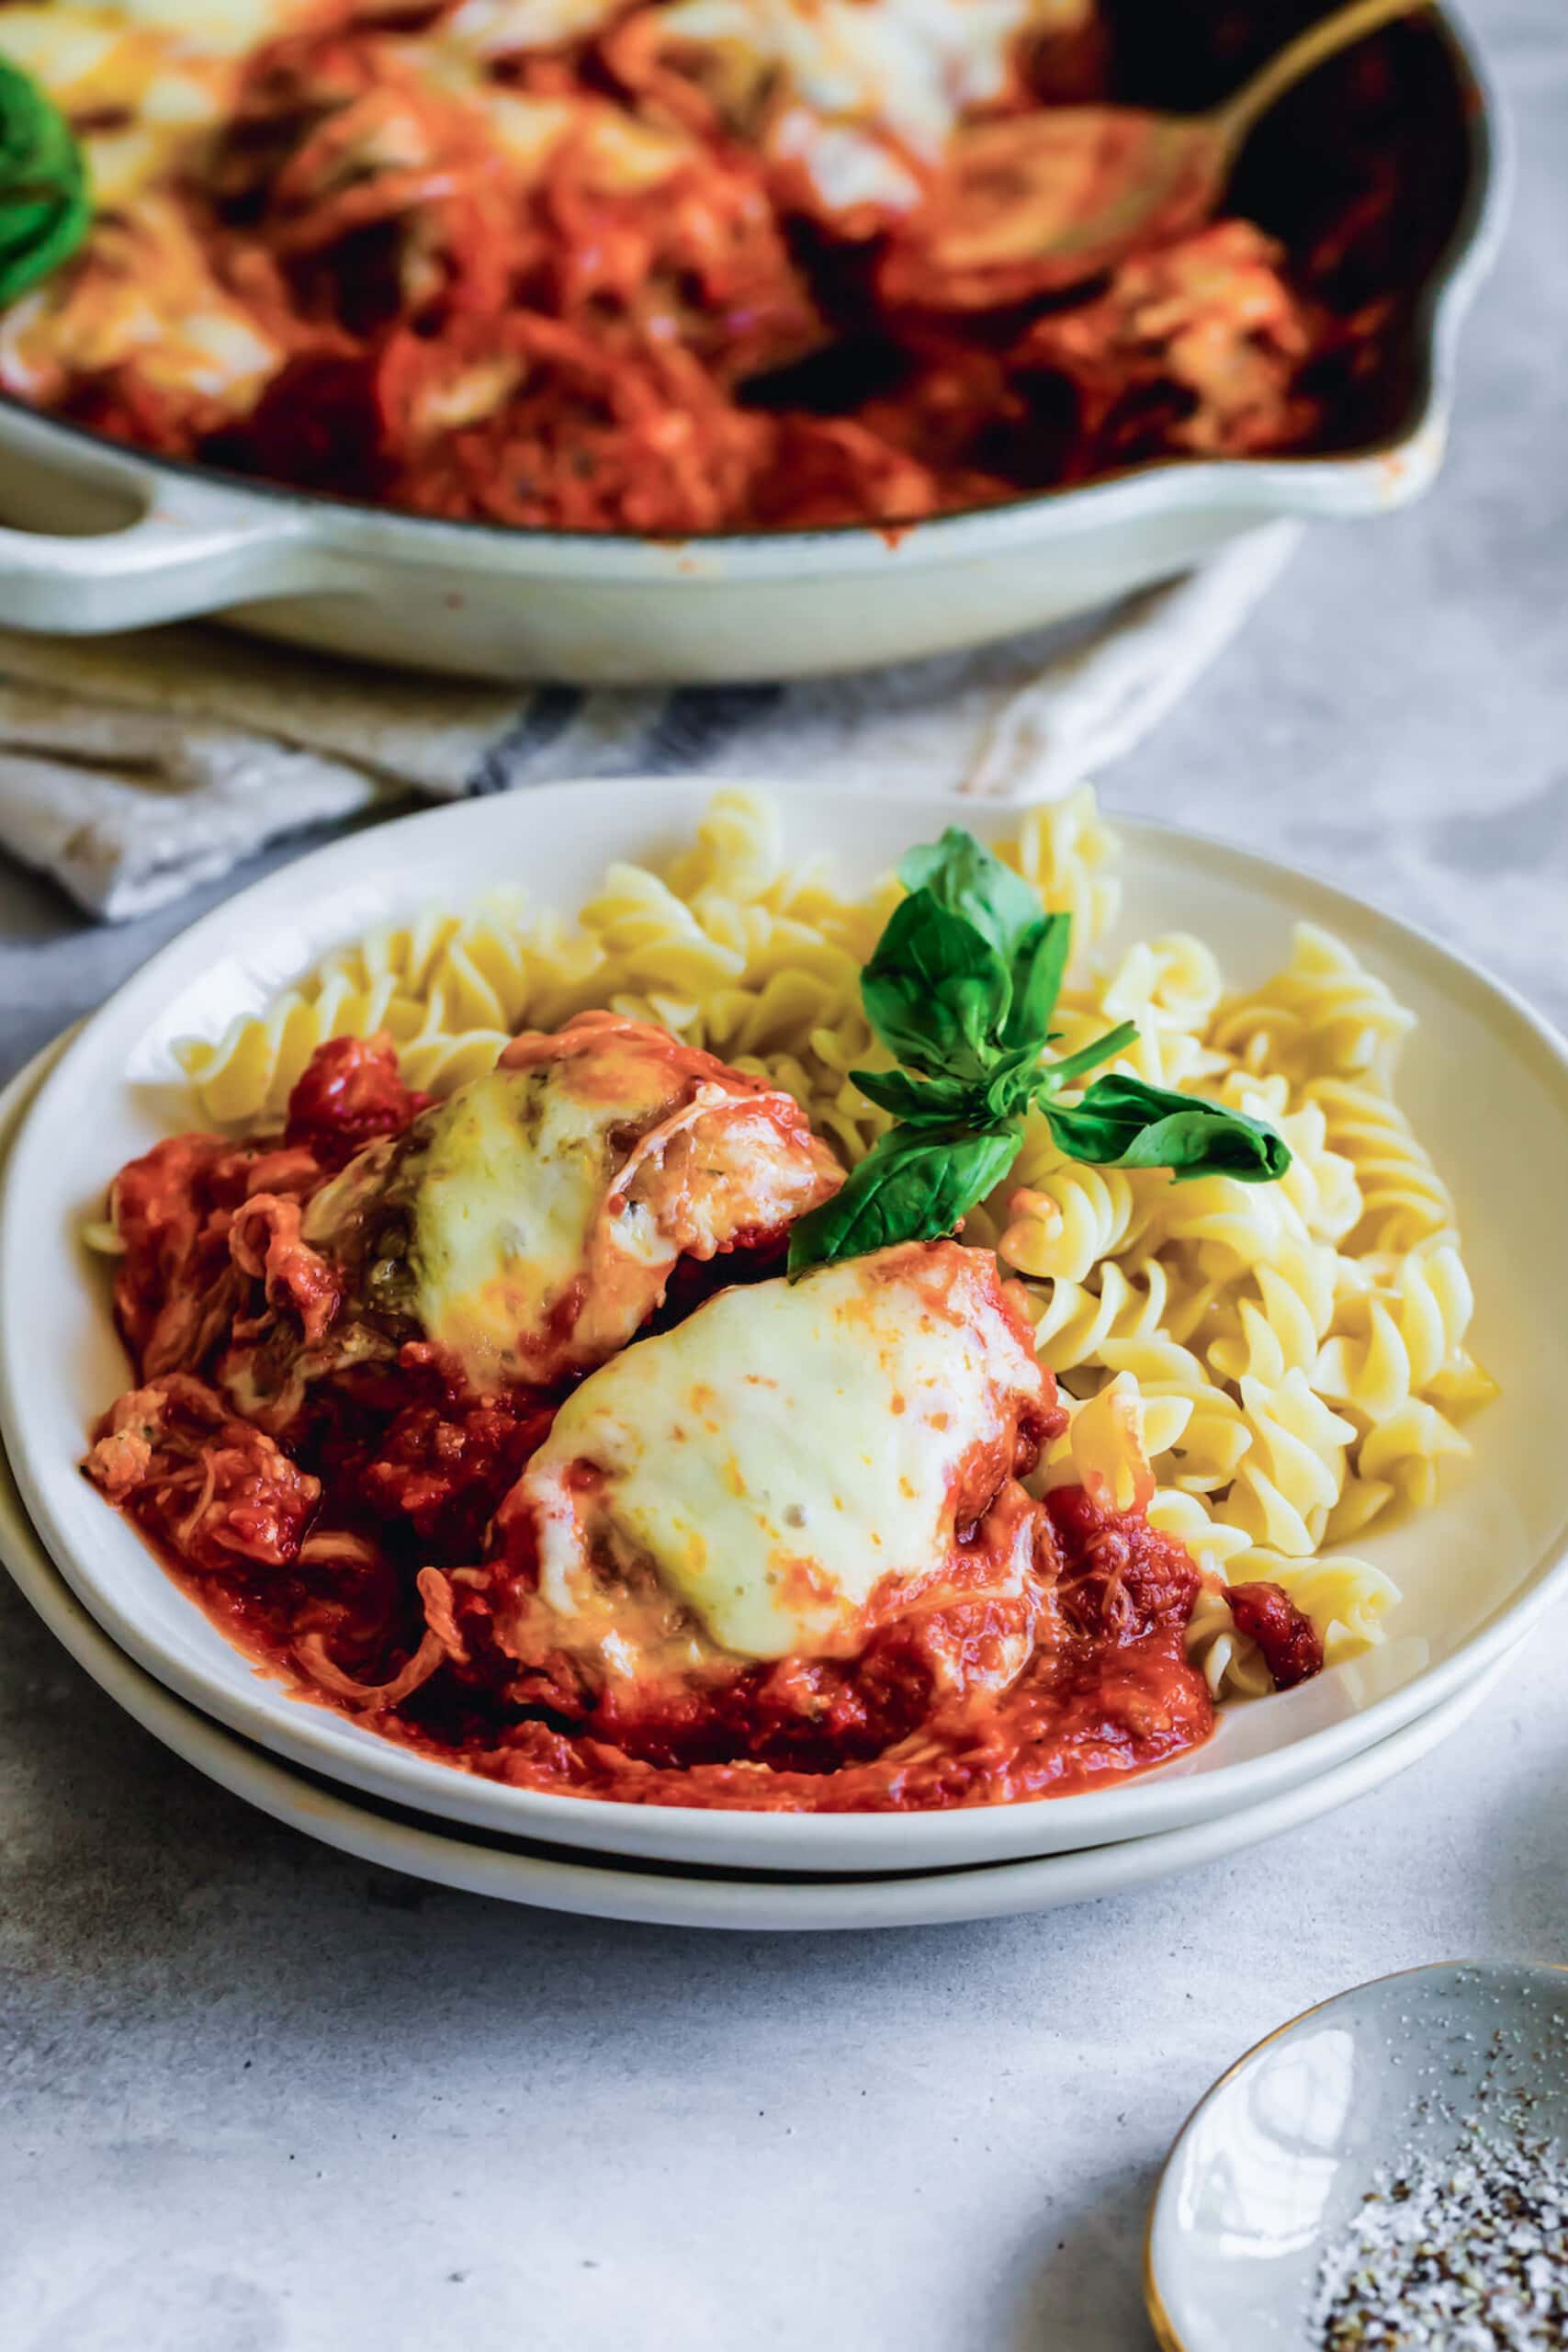 Plate of chicken parmesan with pasta.